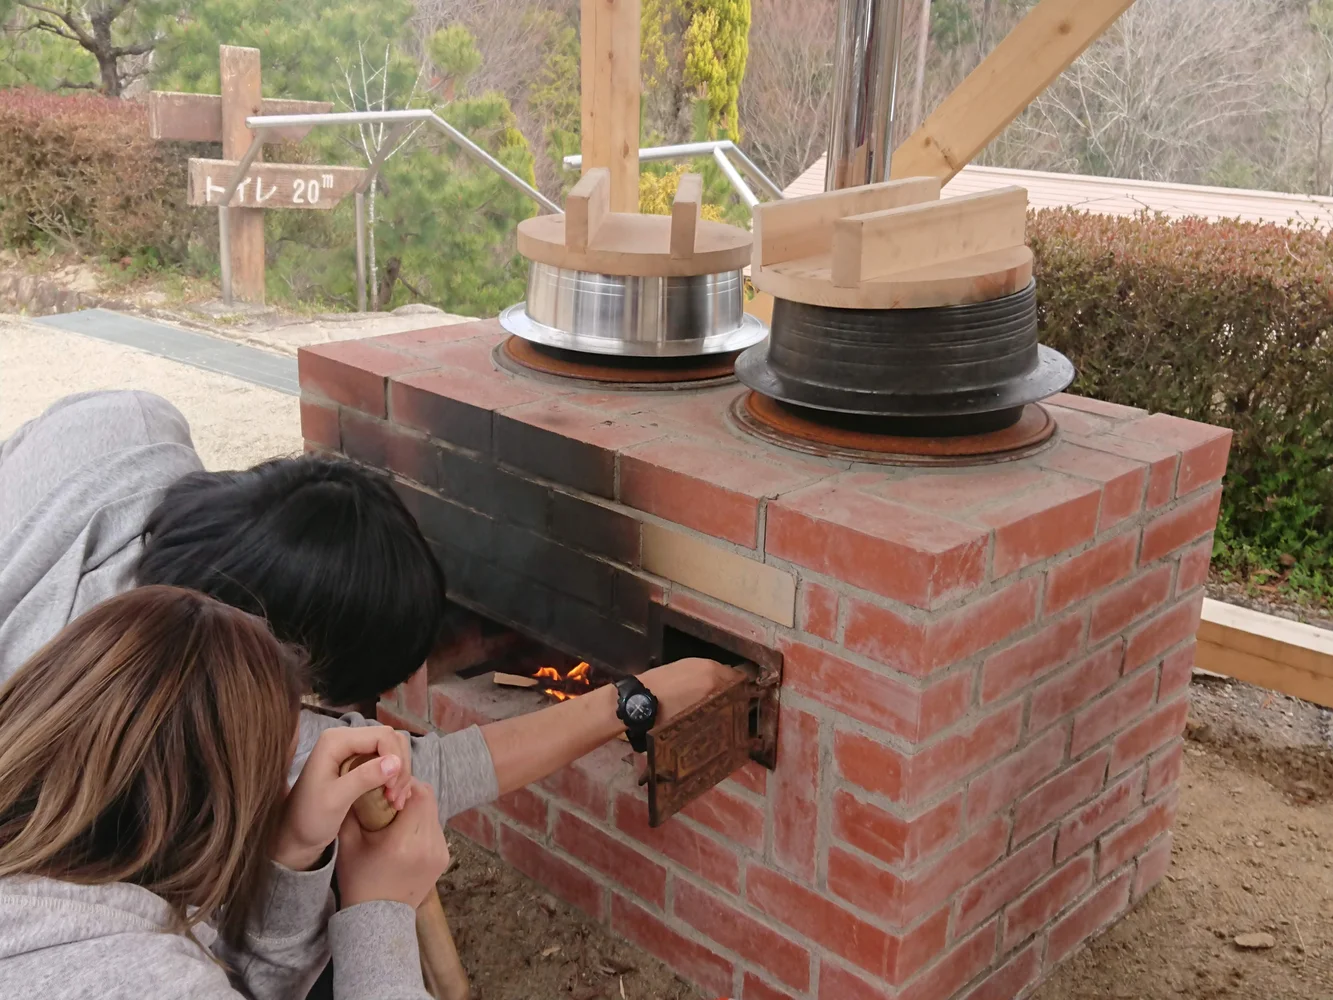 Treetop Fun or Bamboo Crafts & Woodstove Cooking in a Forest